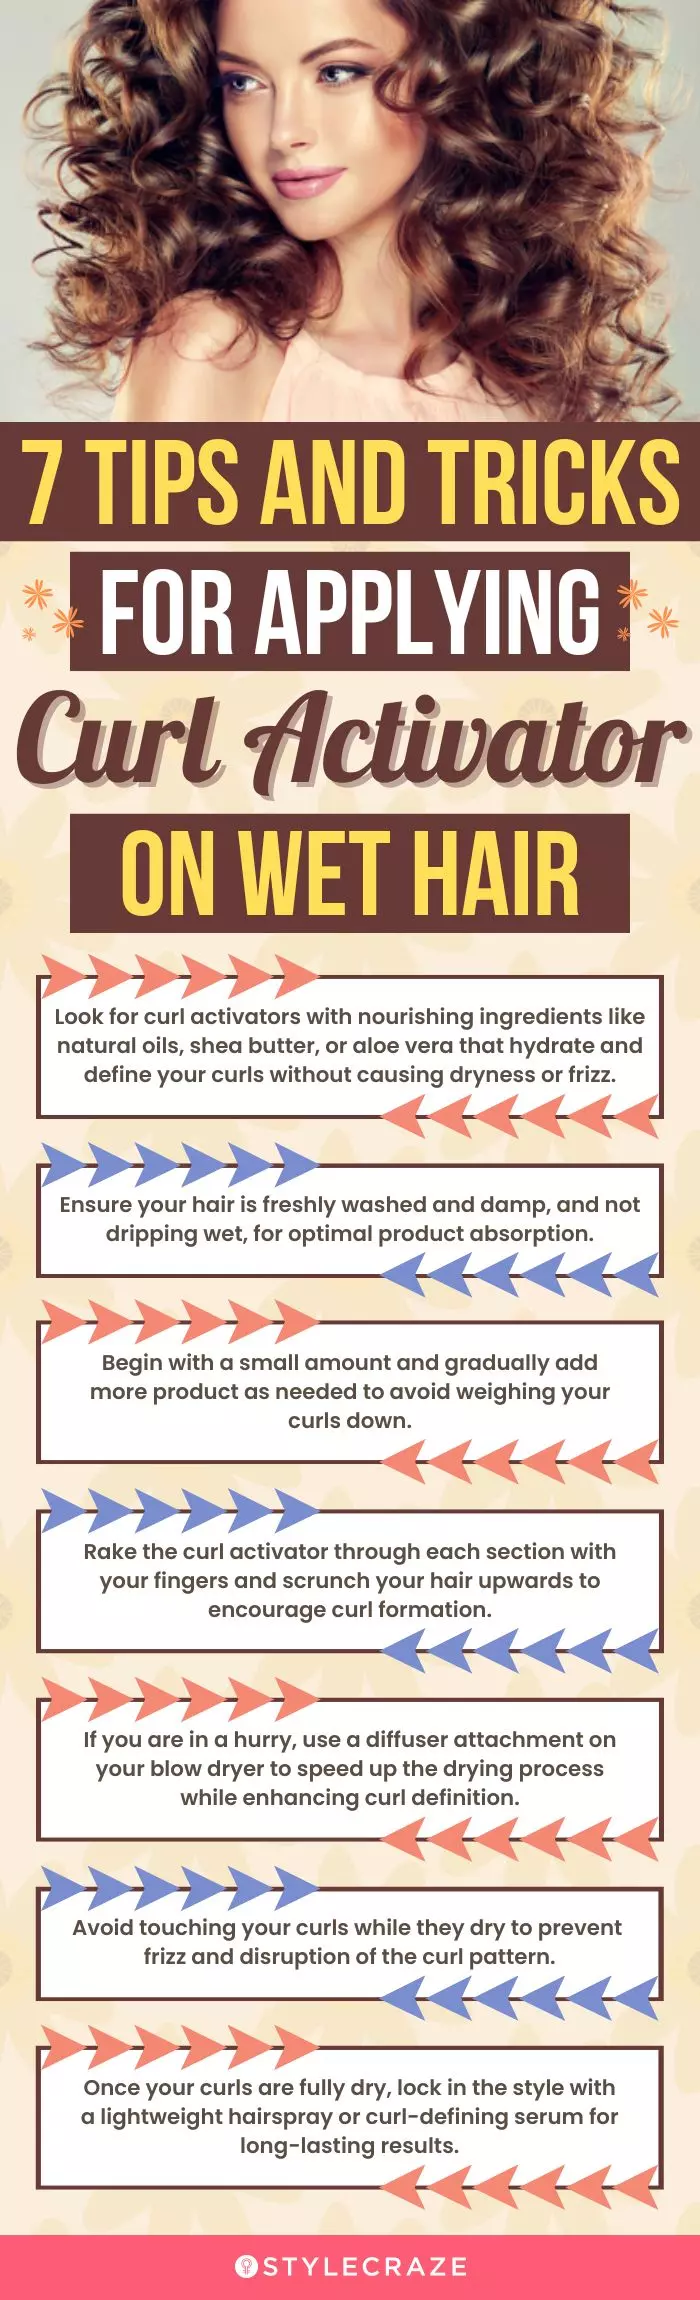 7 Tips And Tricks For Applying Curl Activator On Wet Hair (infographic)